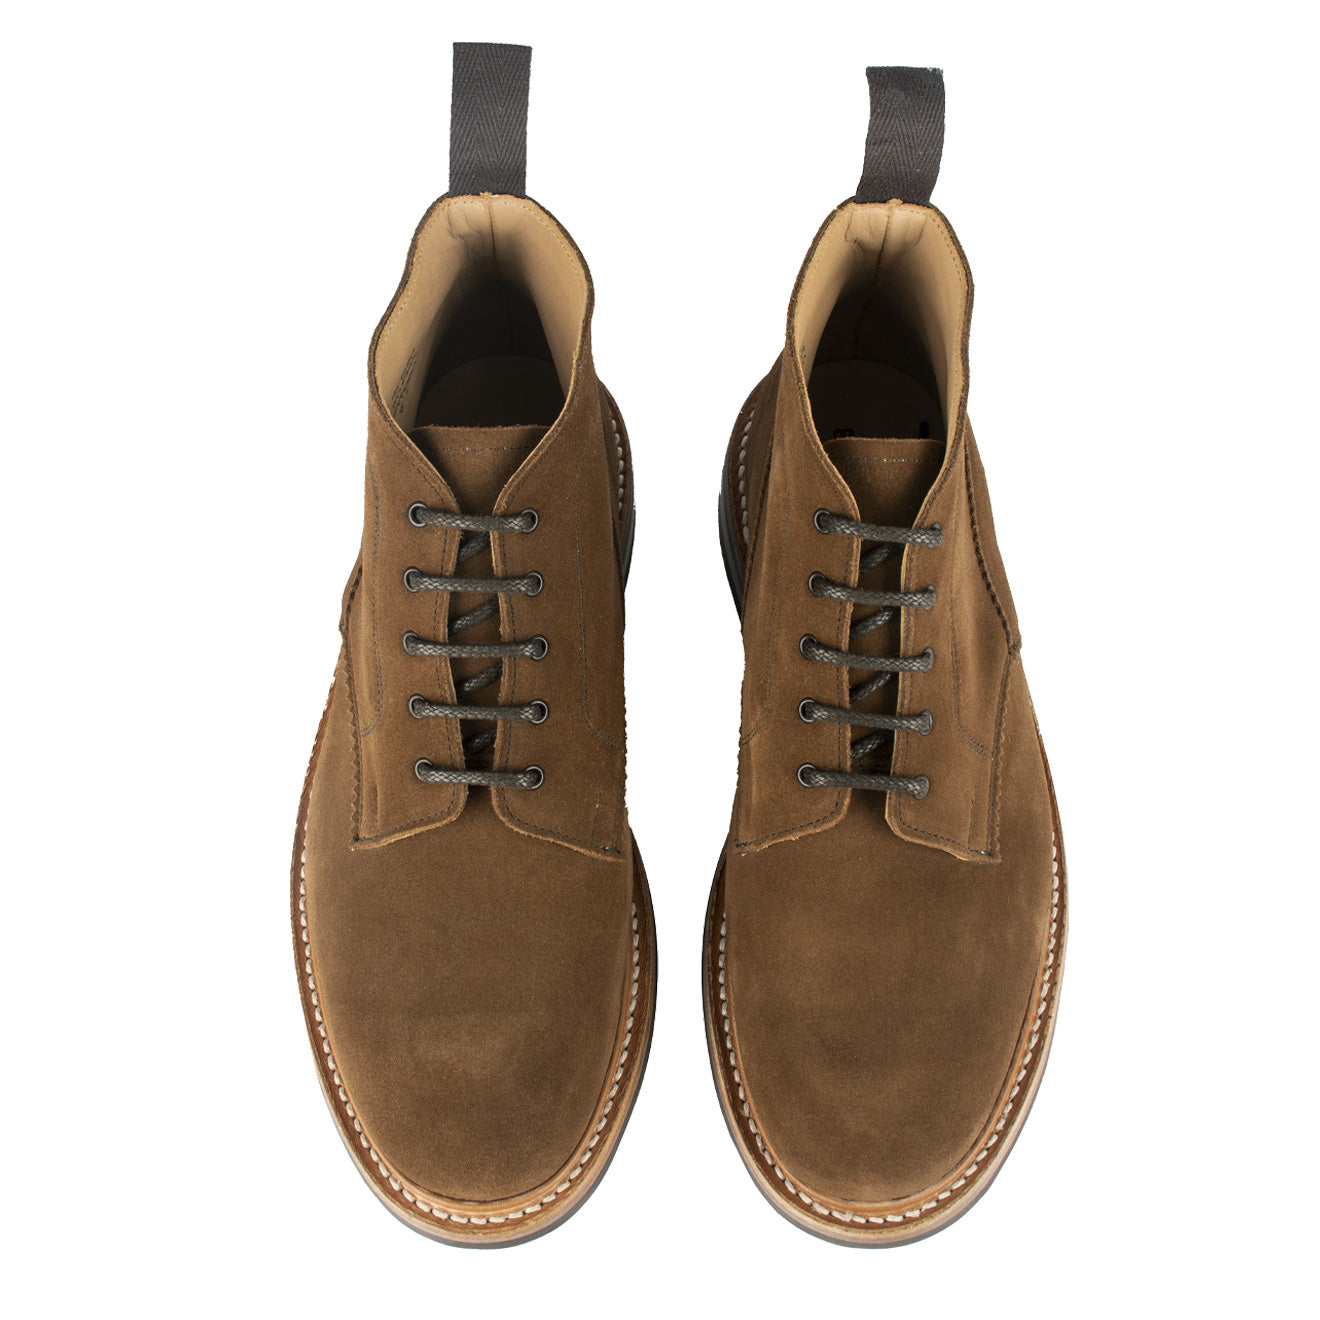 Trickers Evedon Chukka Boot Snuff | The Sporting Lodge